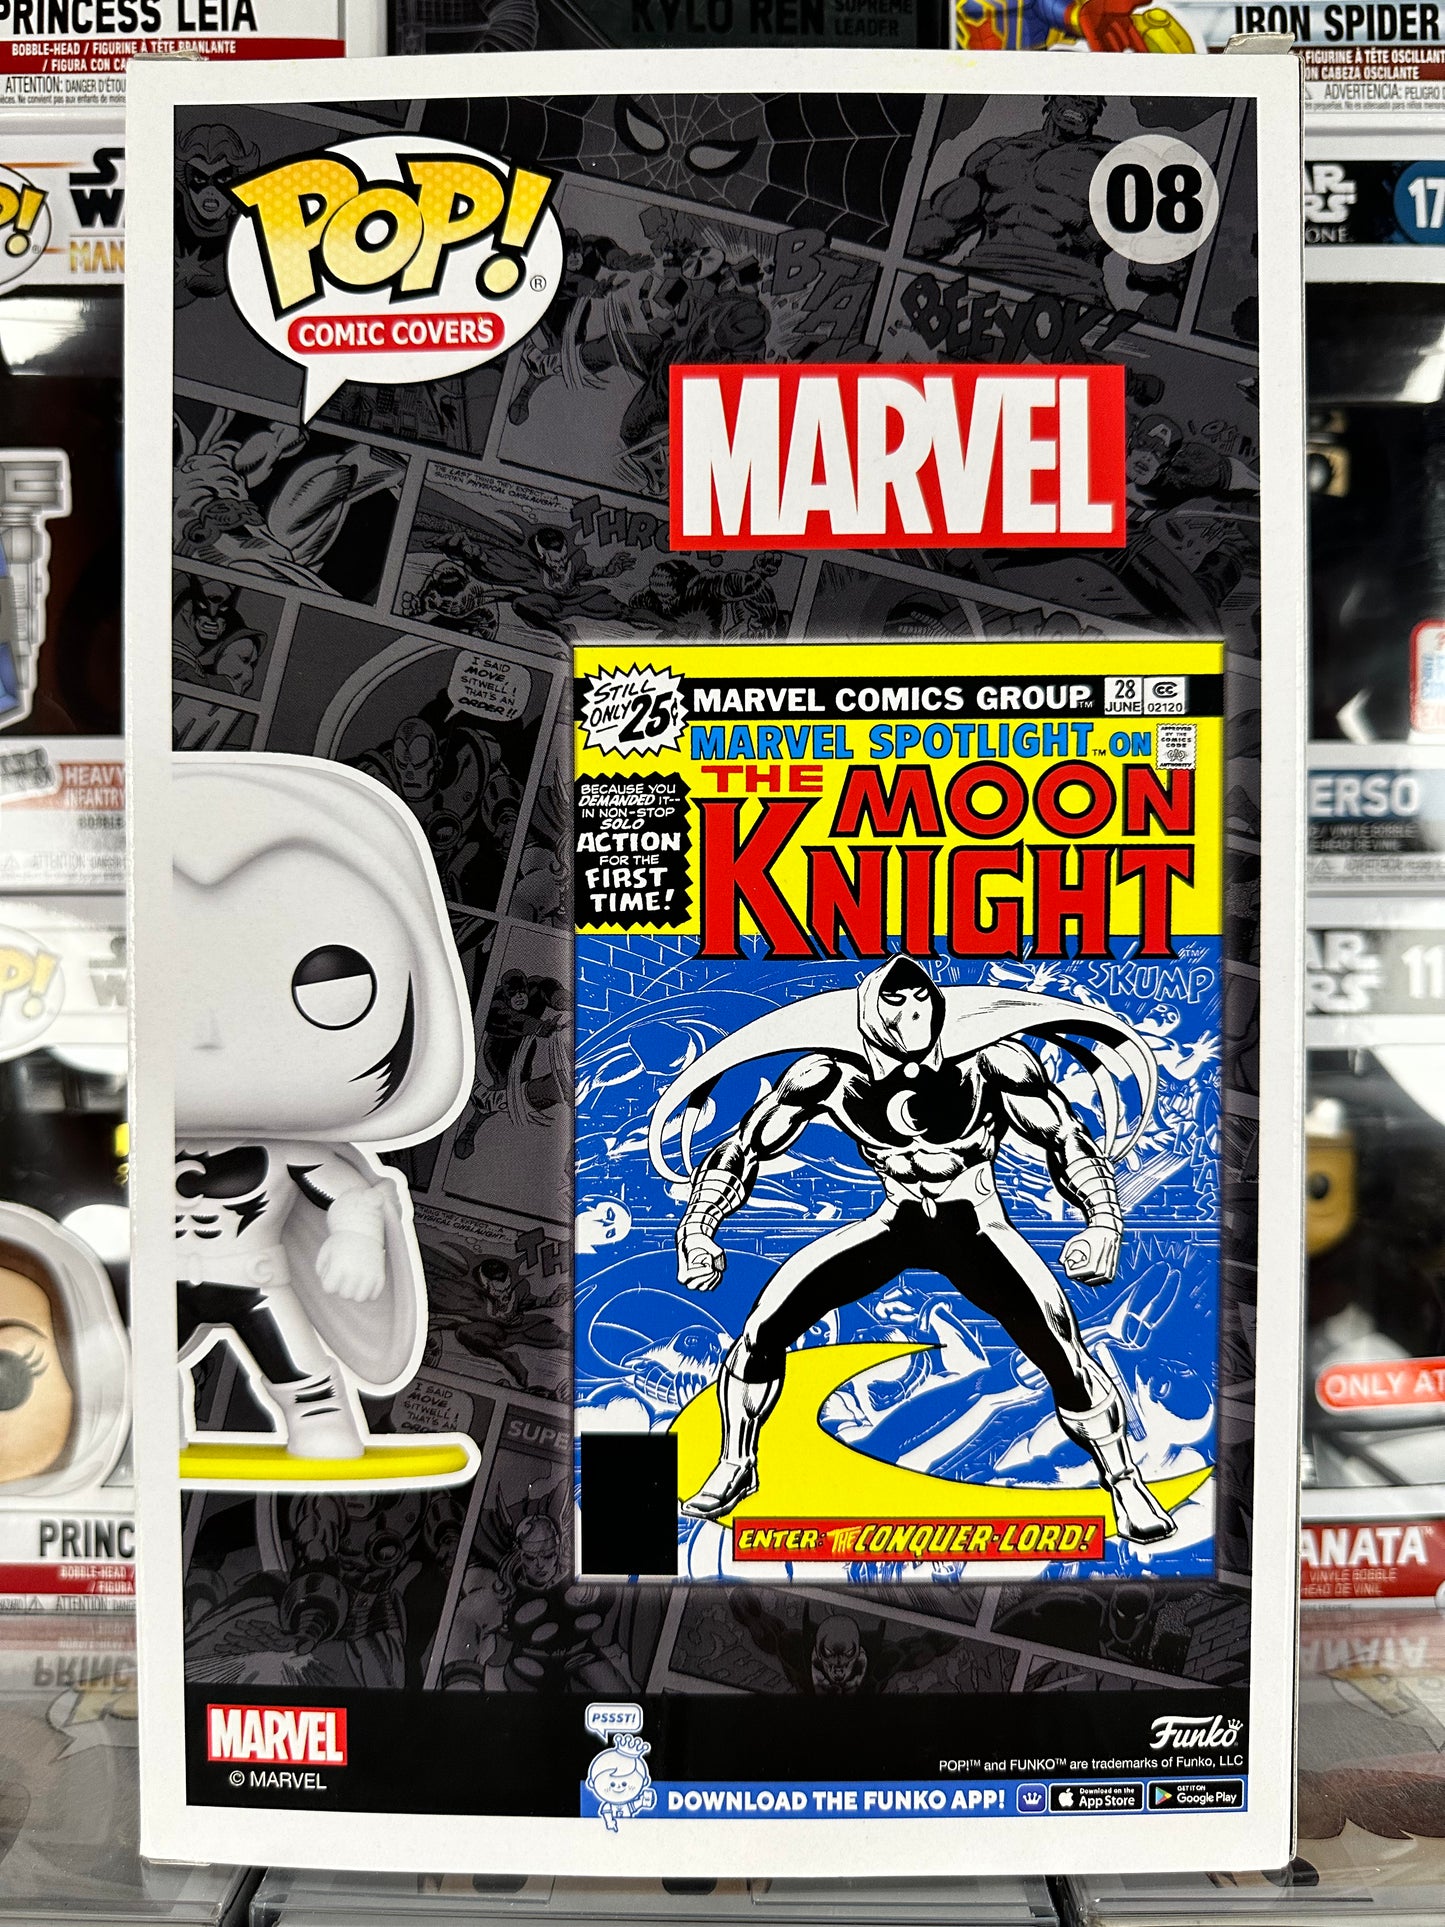 Marvel - Comic Cover - Moon Knight (08)